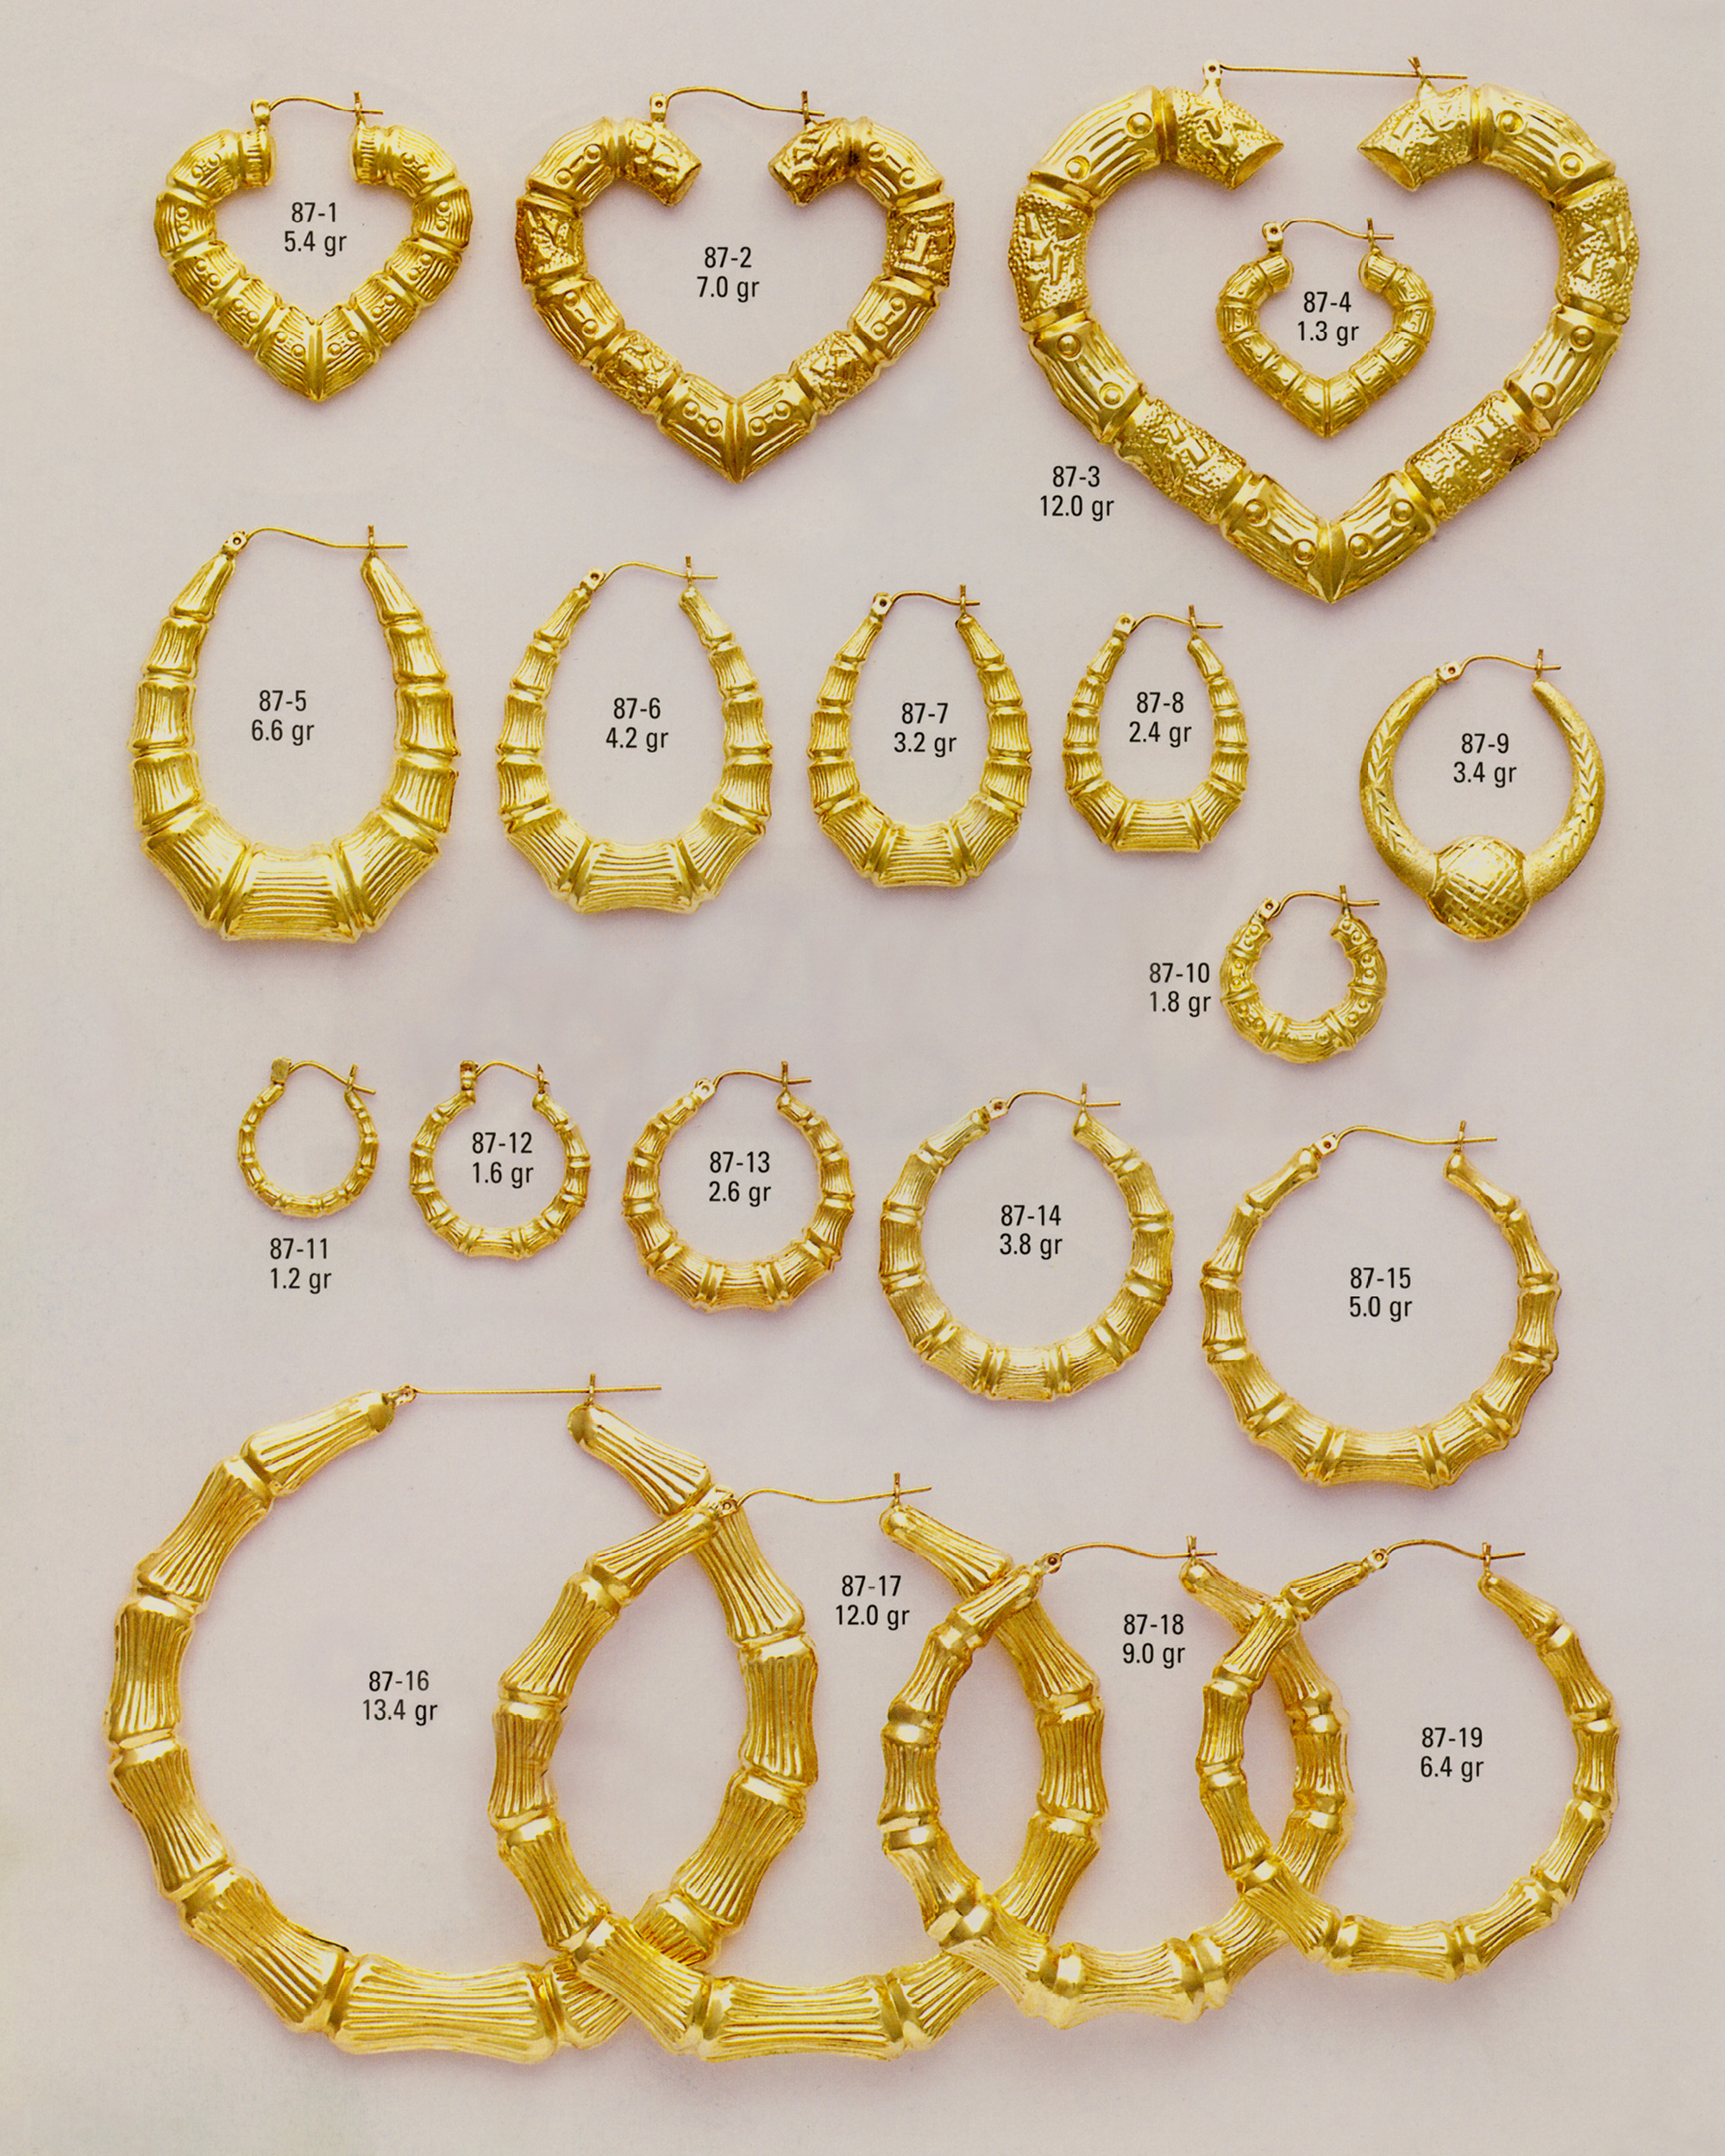 An image from a jewelry catalogue depicting a variety of bamboo hoops.